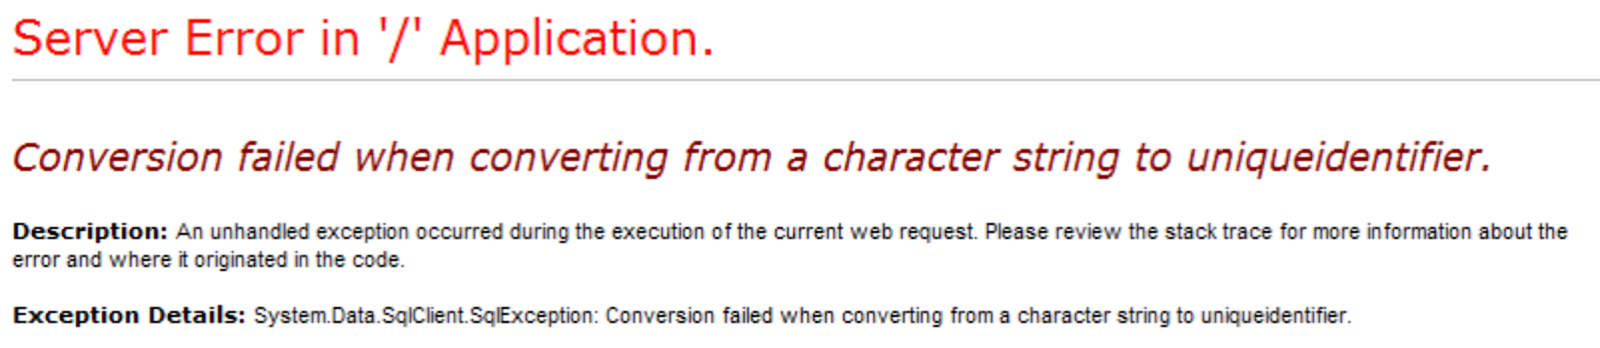 When you see "Server Error in '/' Application, what's the cause? Poor quality! What can you do? It's a judgement call.